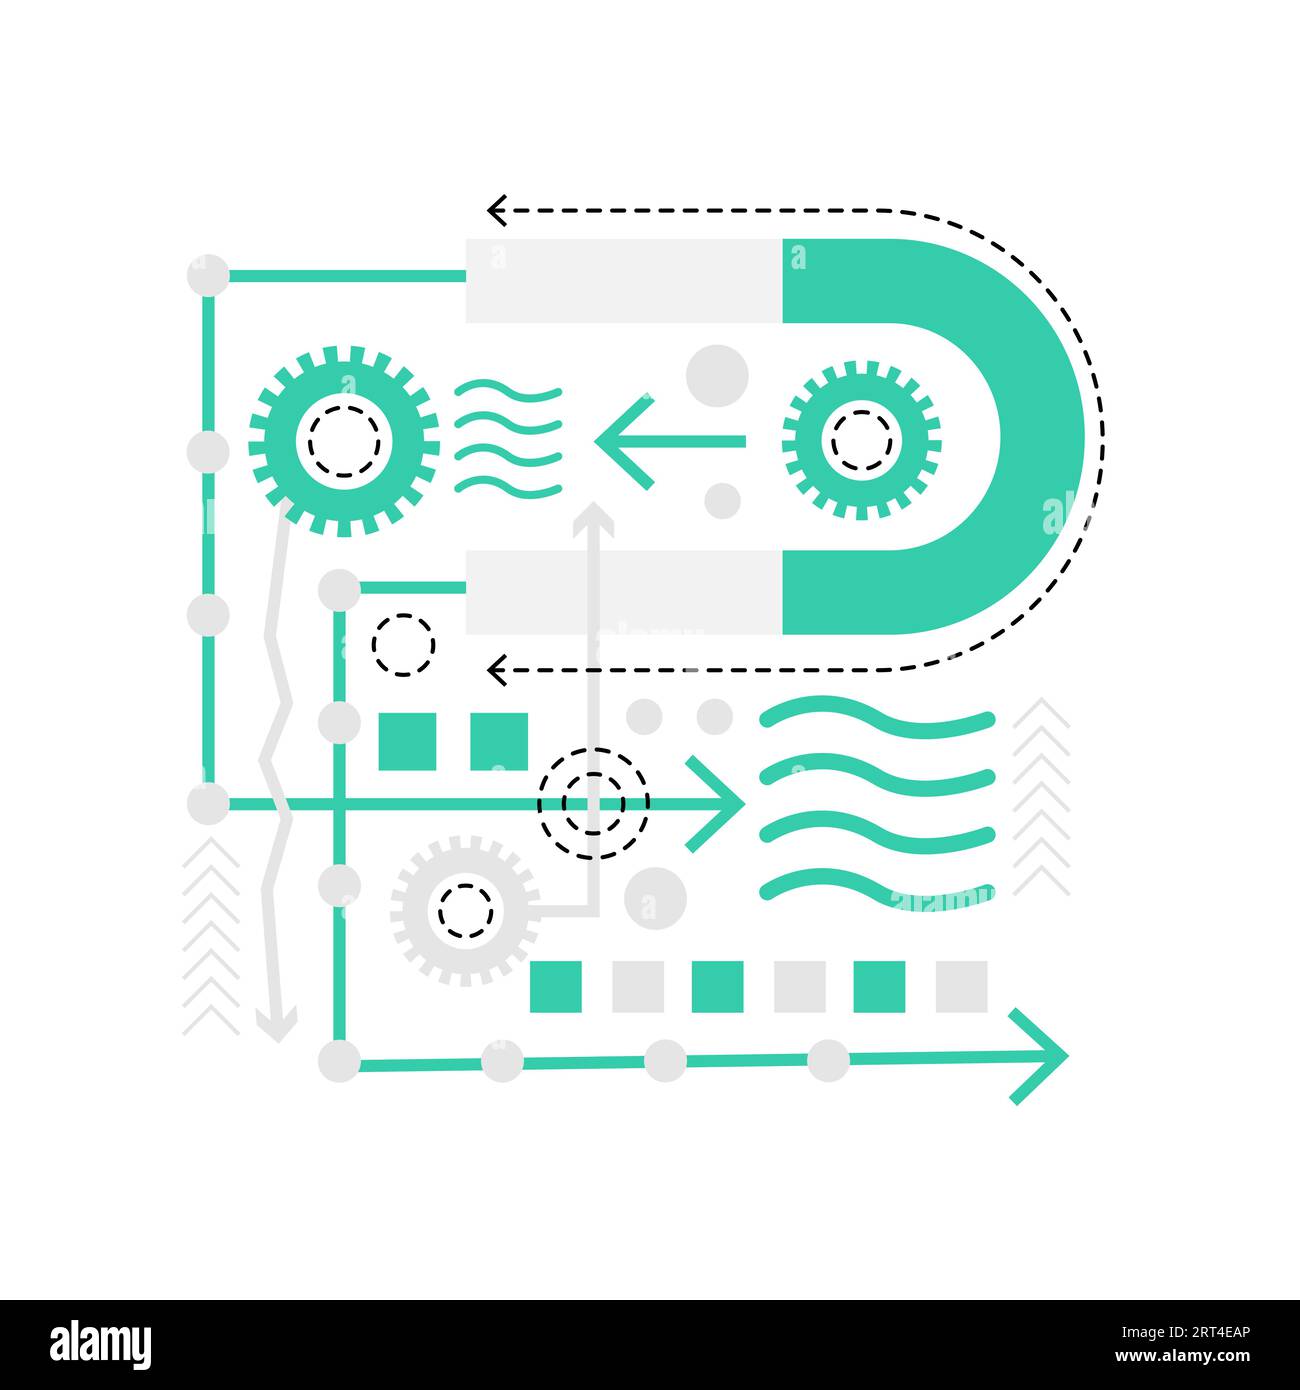 Physics magnetism movement. Genetics biochemistry science research vector illustration Stock Vector